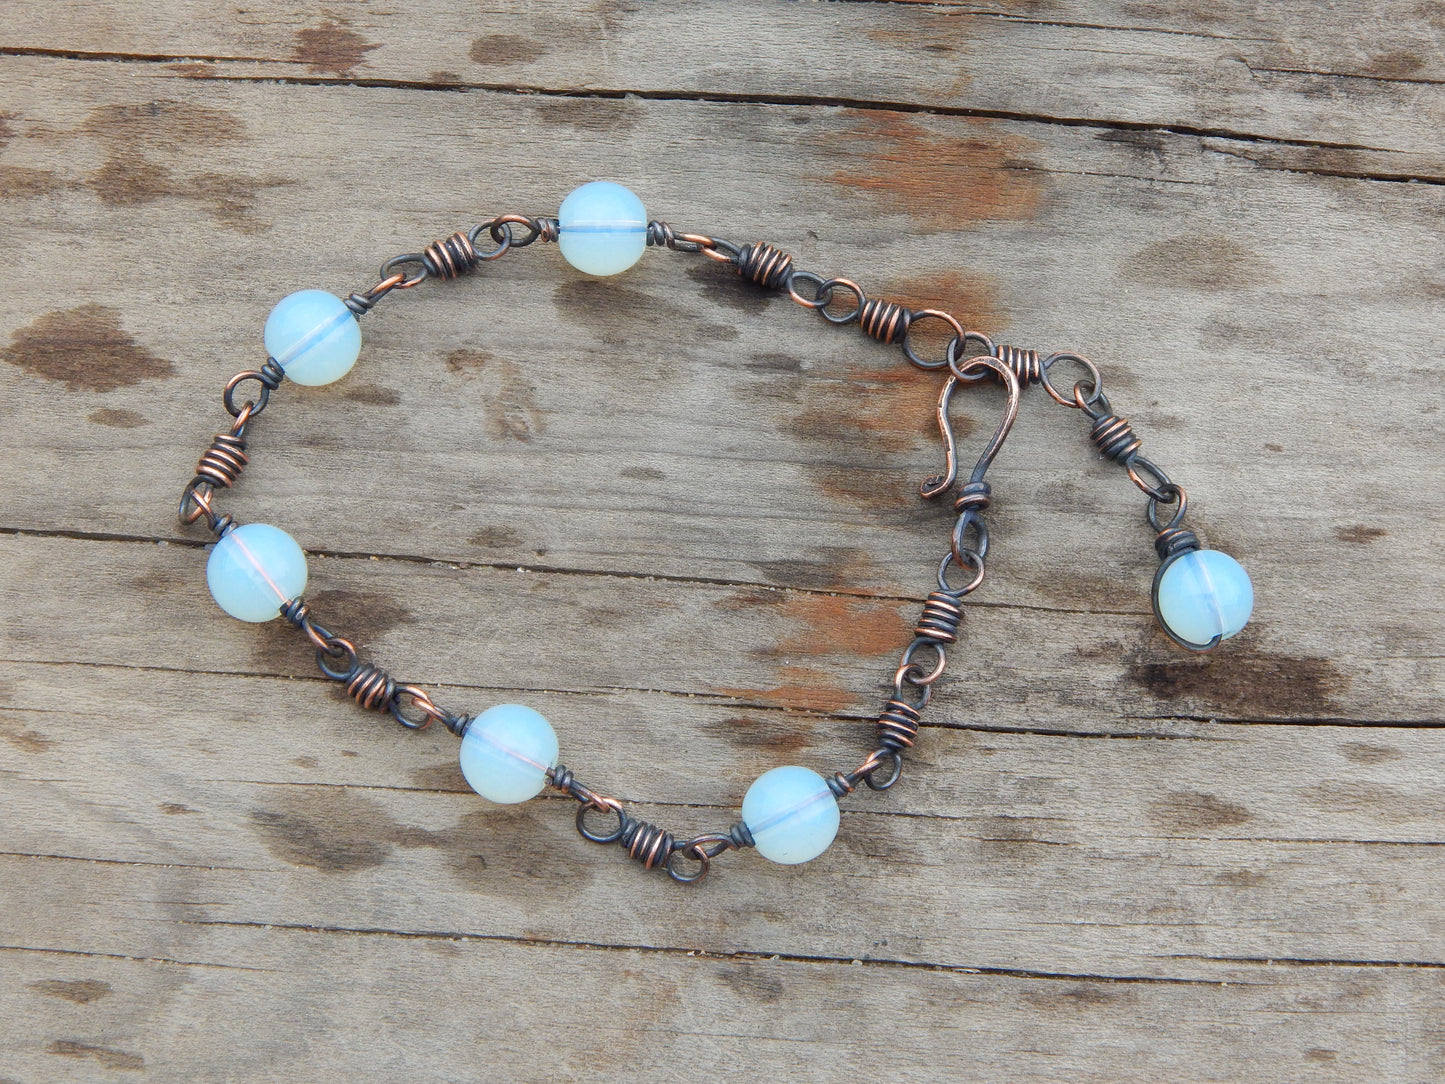 Copper and opalite wire wrapped bracelet